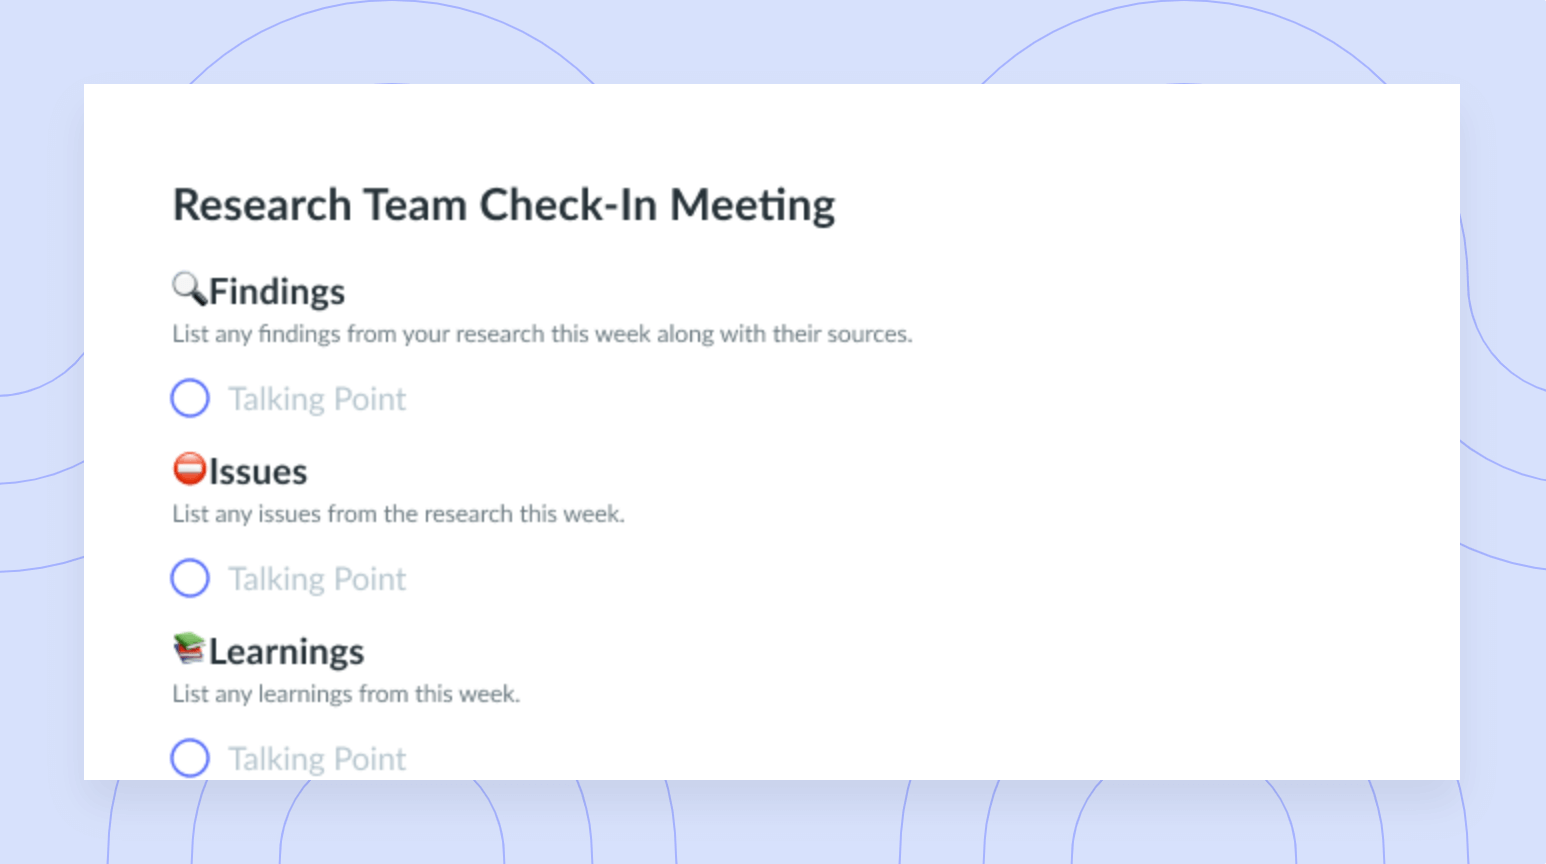 Research Team Check-In Meeting Template